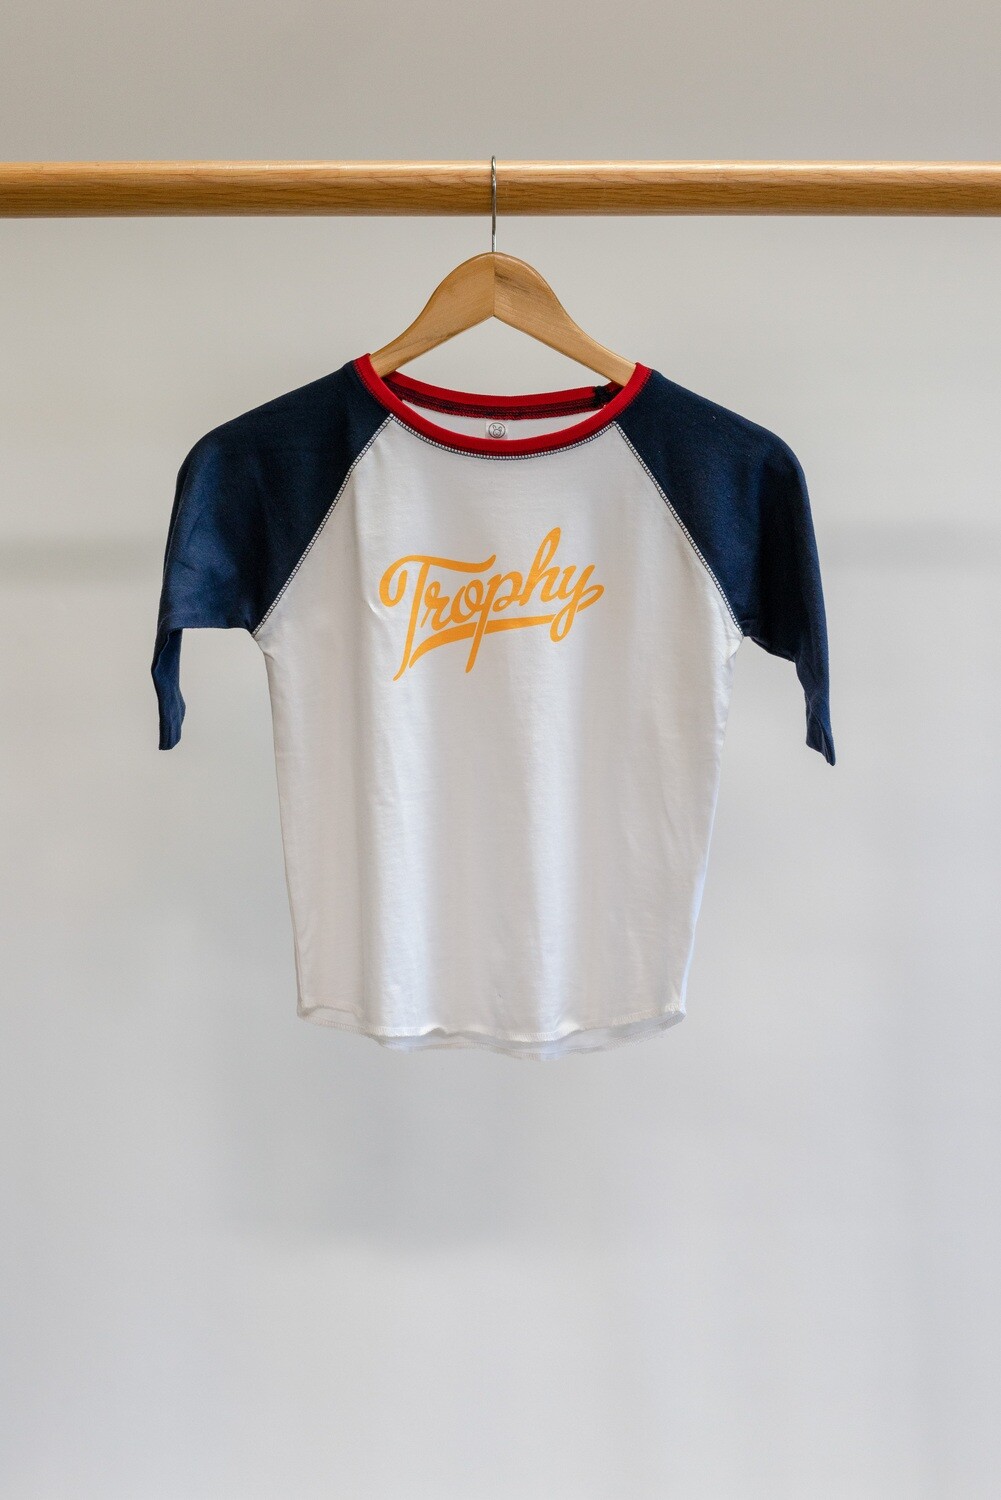 Trophy Toddler Baseball Tee - Blue and Red